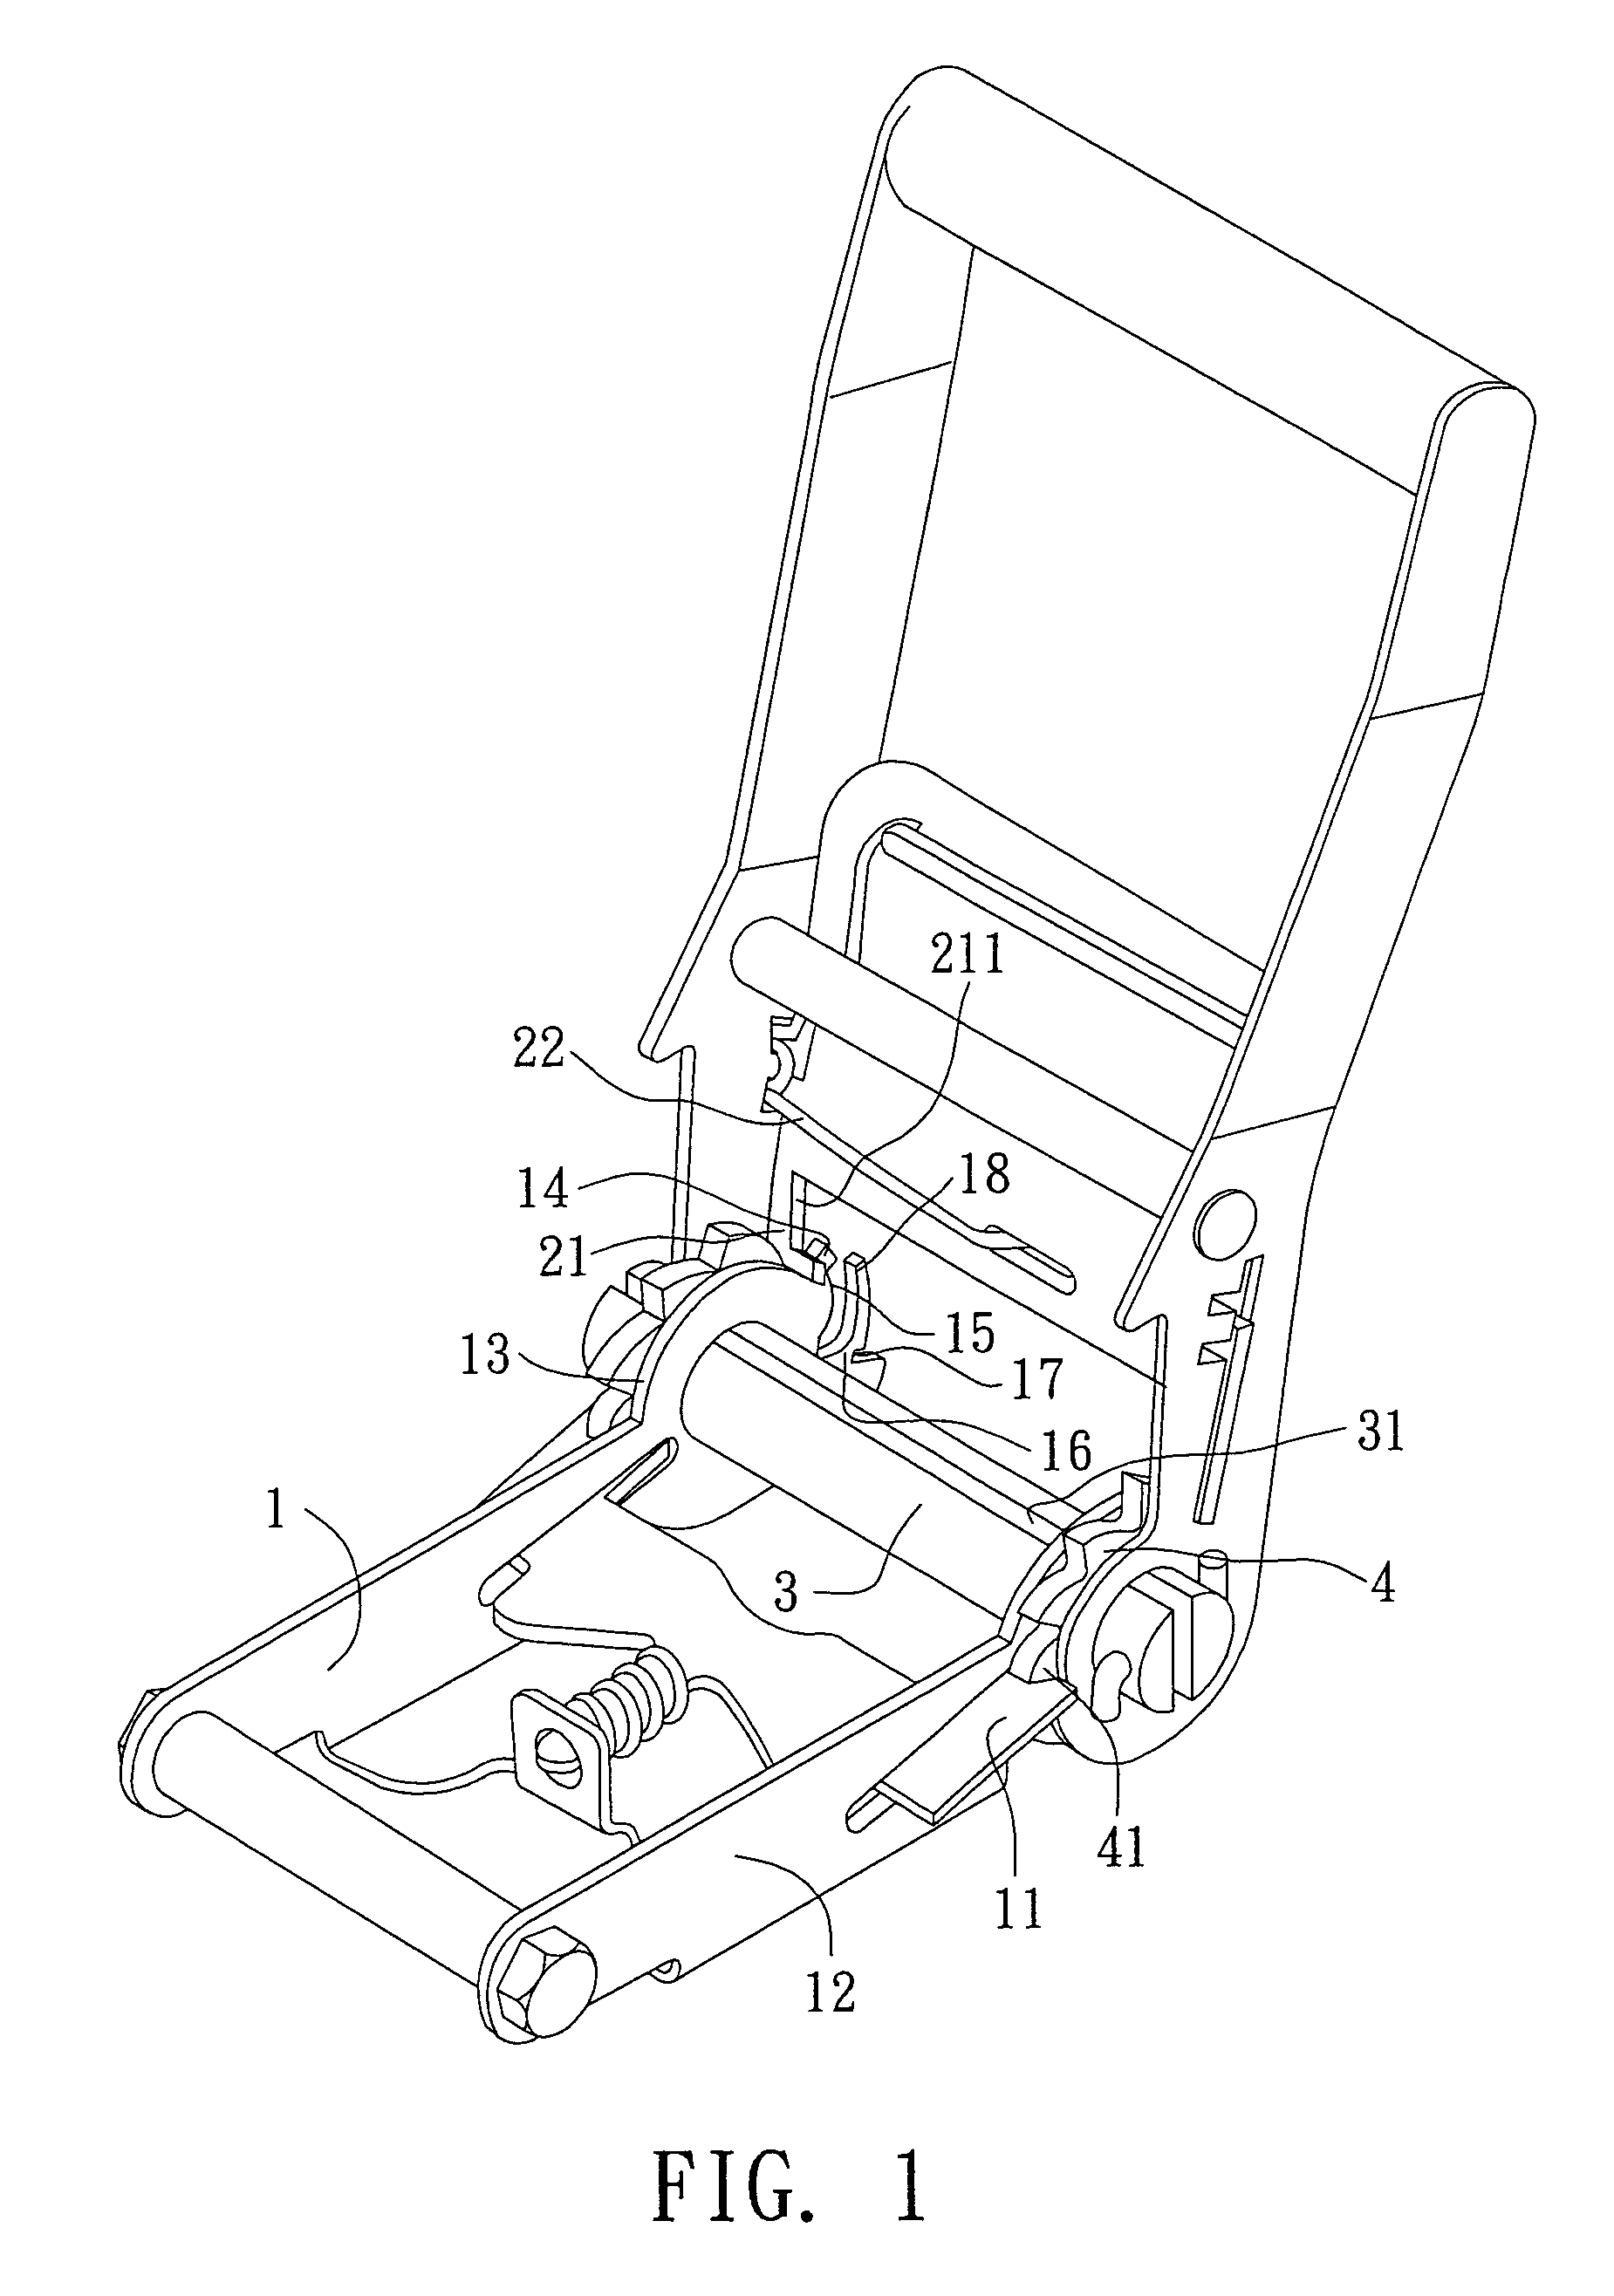 Belt reel assembly for fastening goods on a truck